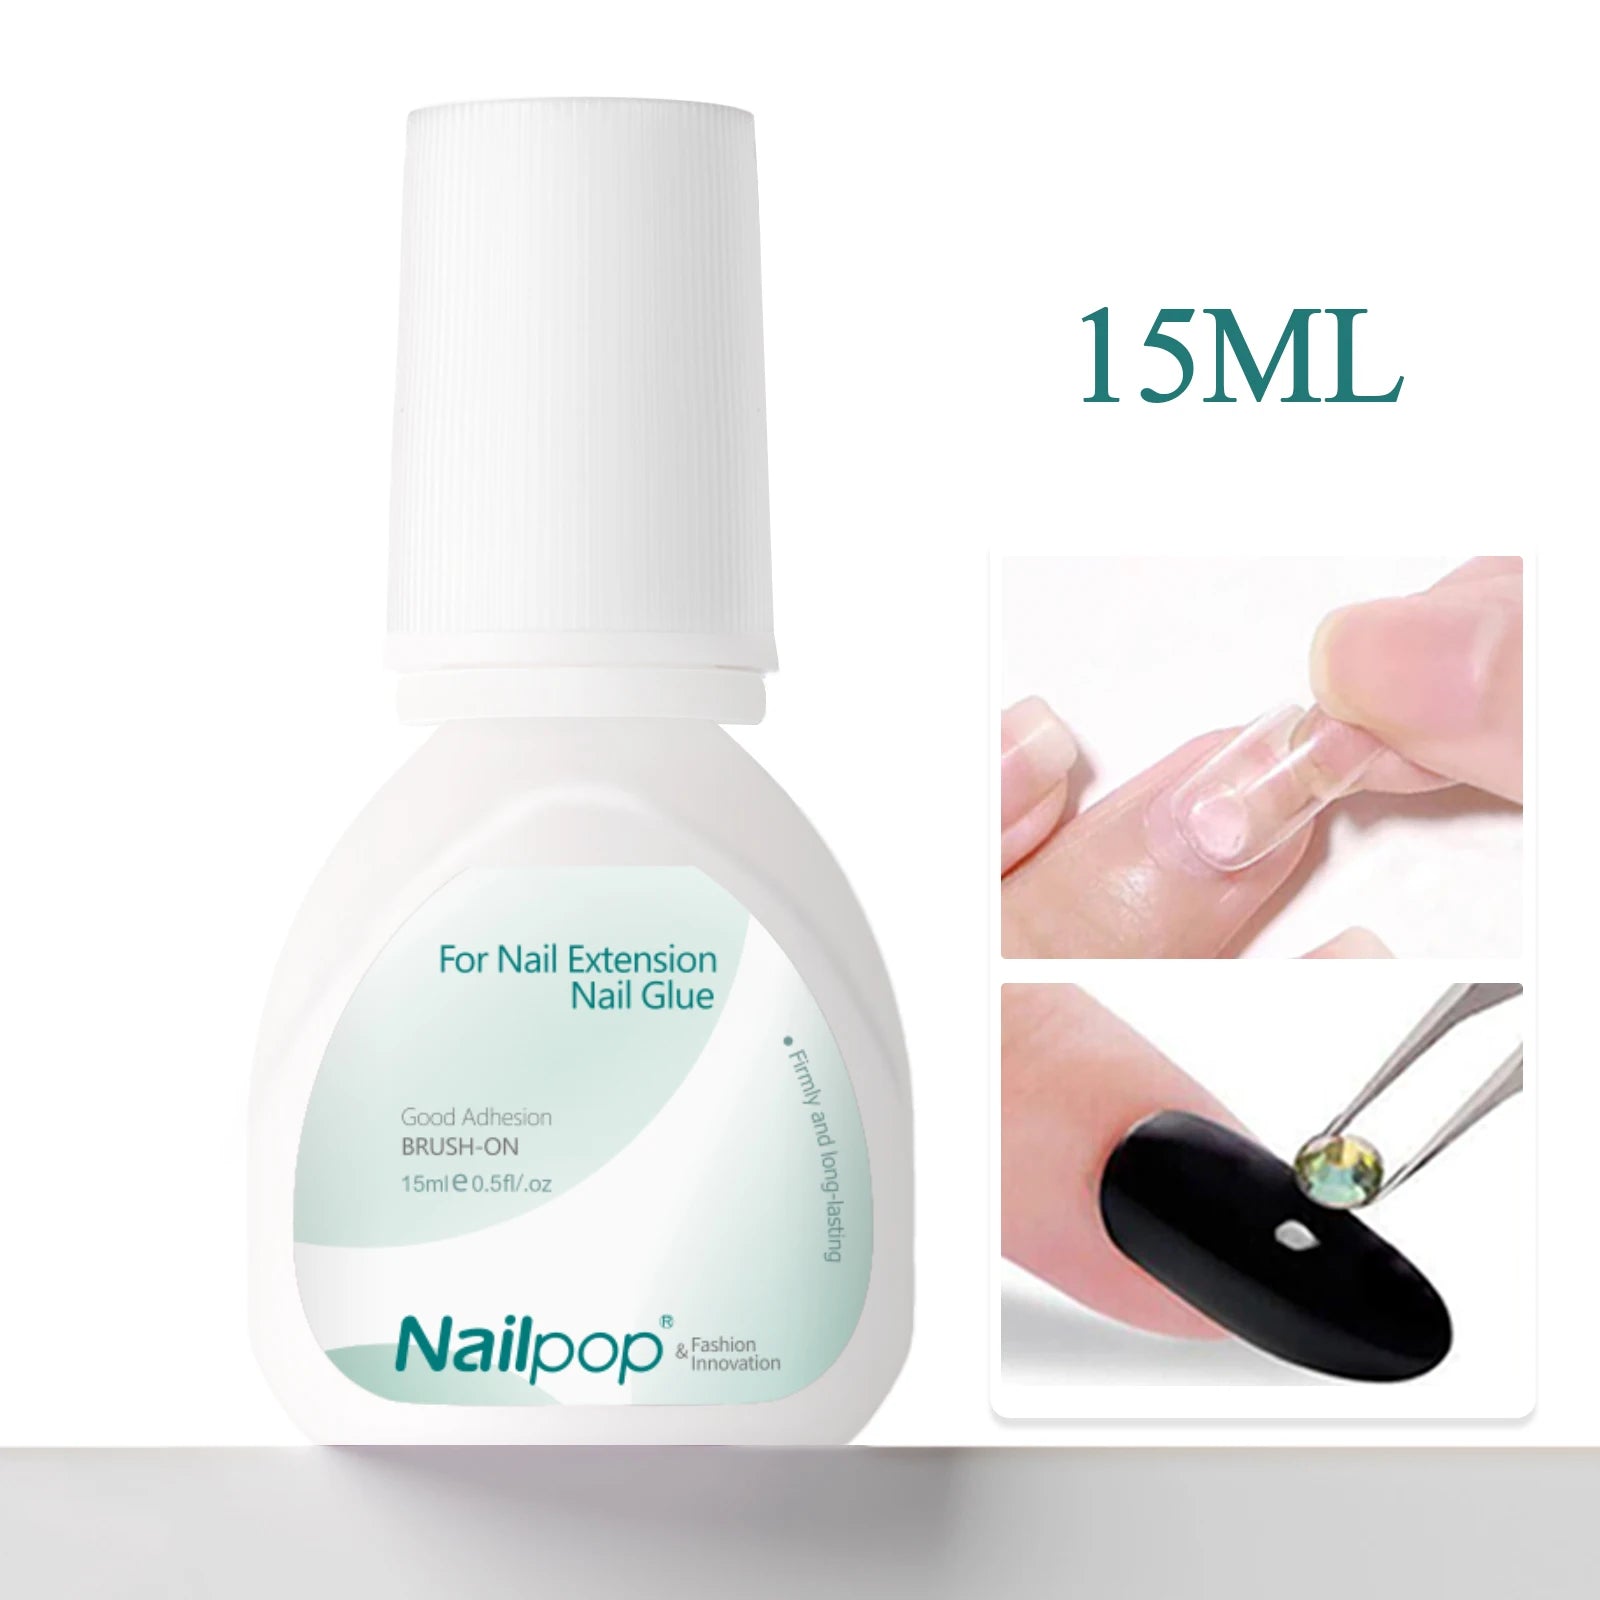 Nailpop 3S Fast Drying Nail Glue for Nail Tips Super Strong Nail Art Accesories Manicure Tool Rhinestone Gel Glue Withs Brush  beautylum.com Nail Glue 15ML  